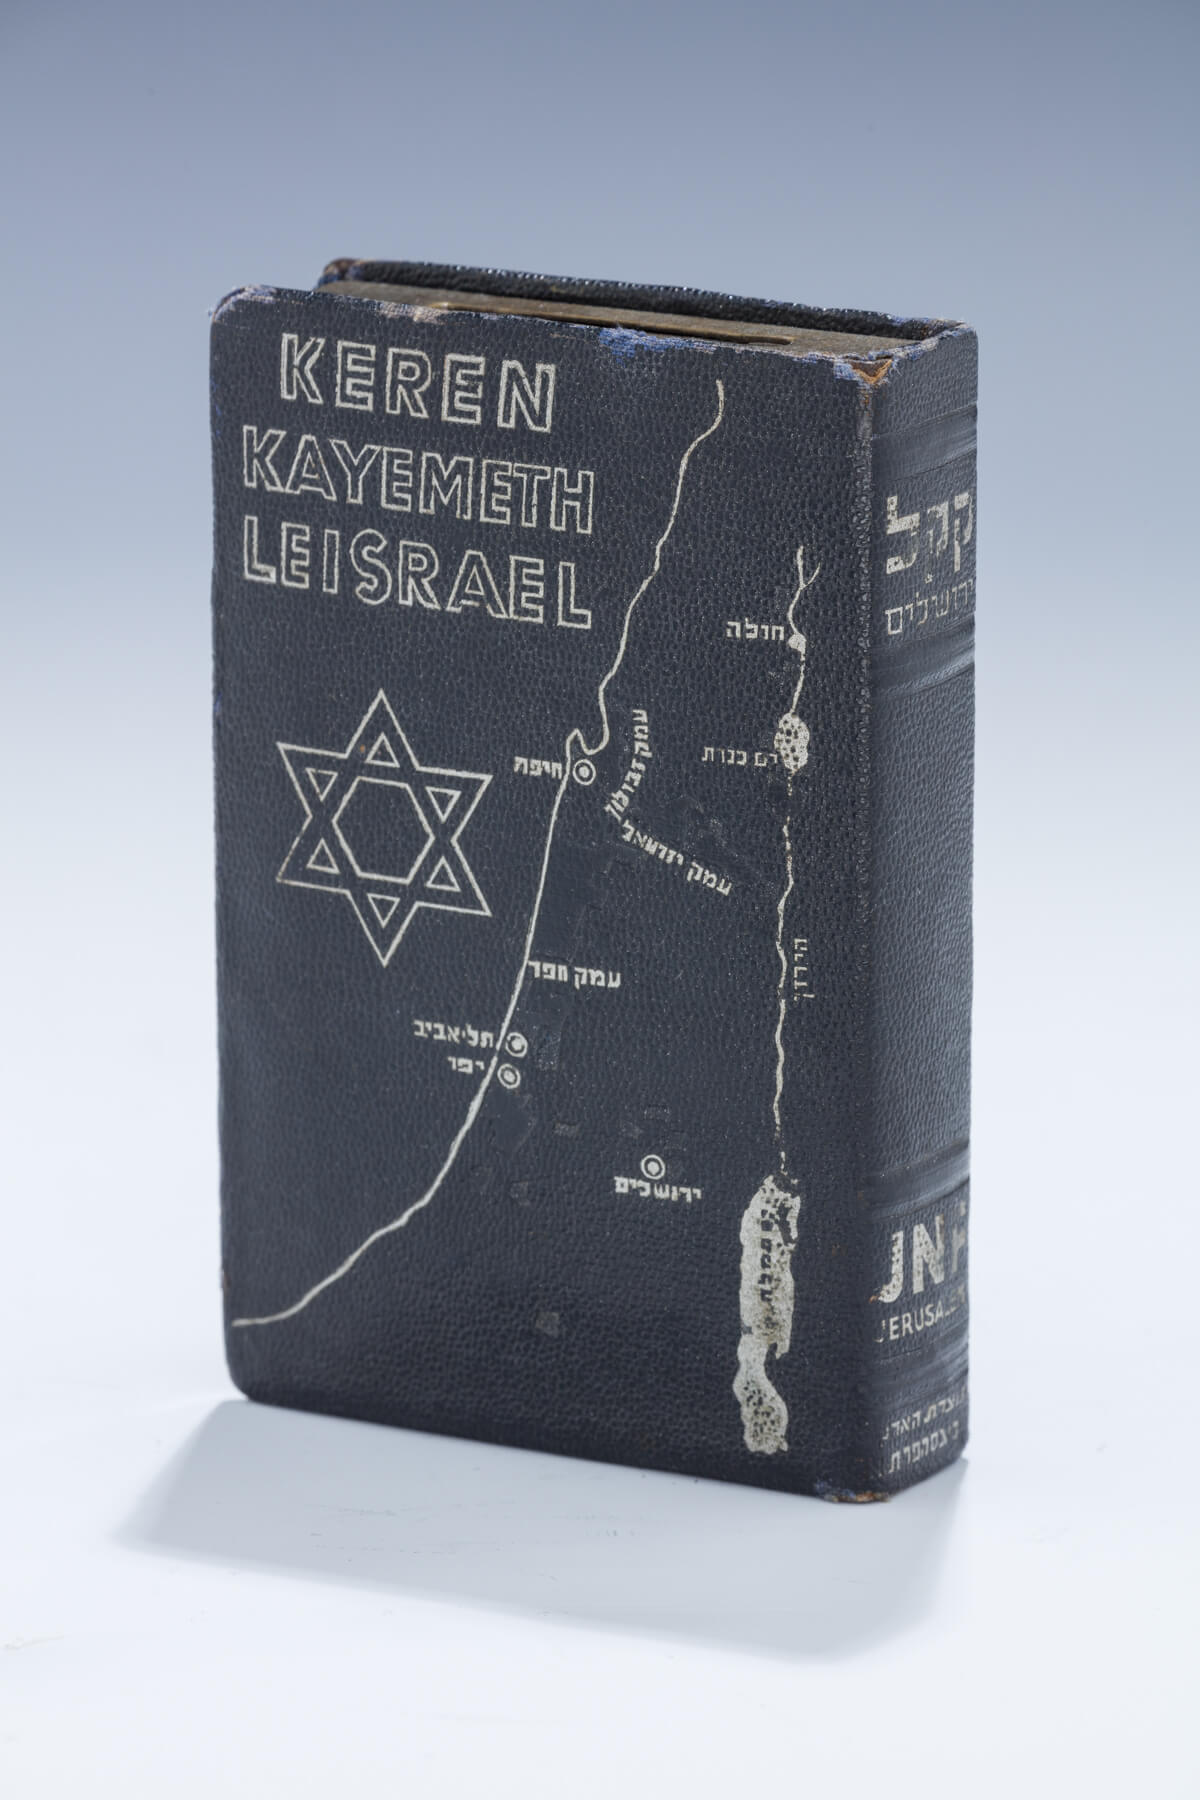 030. A Keren Kayemeth Leisrael Charity Container